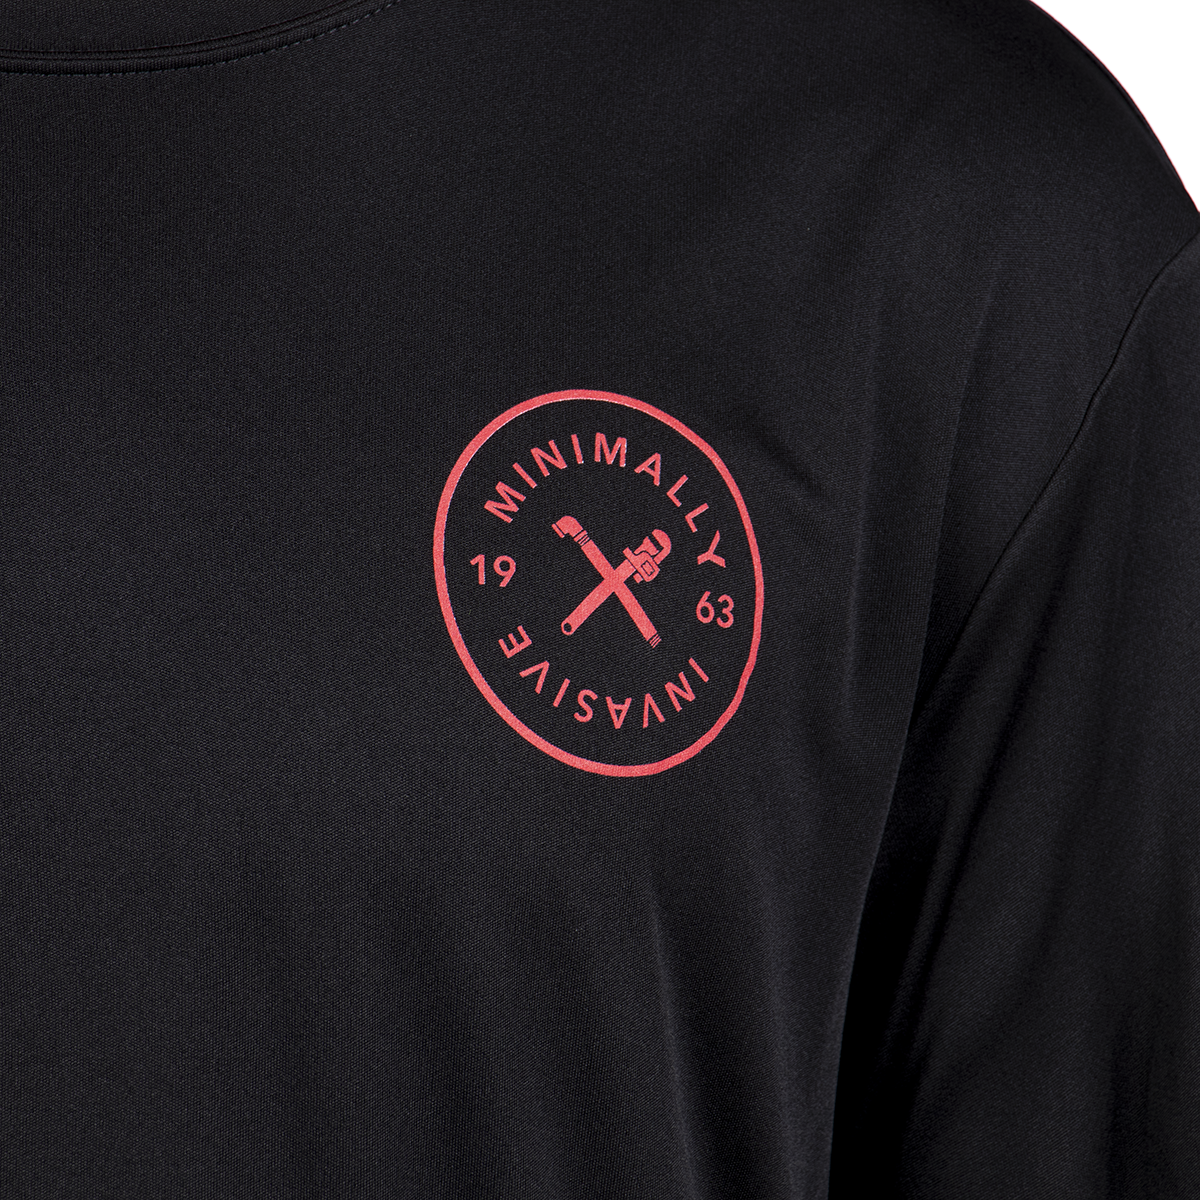 Competitor Tee - Red Logo